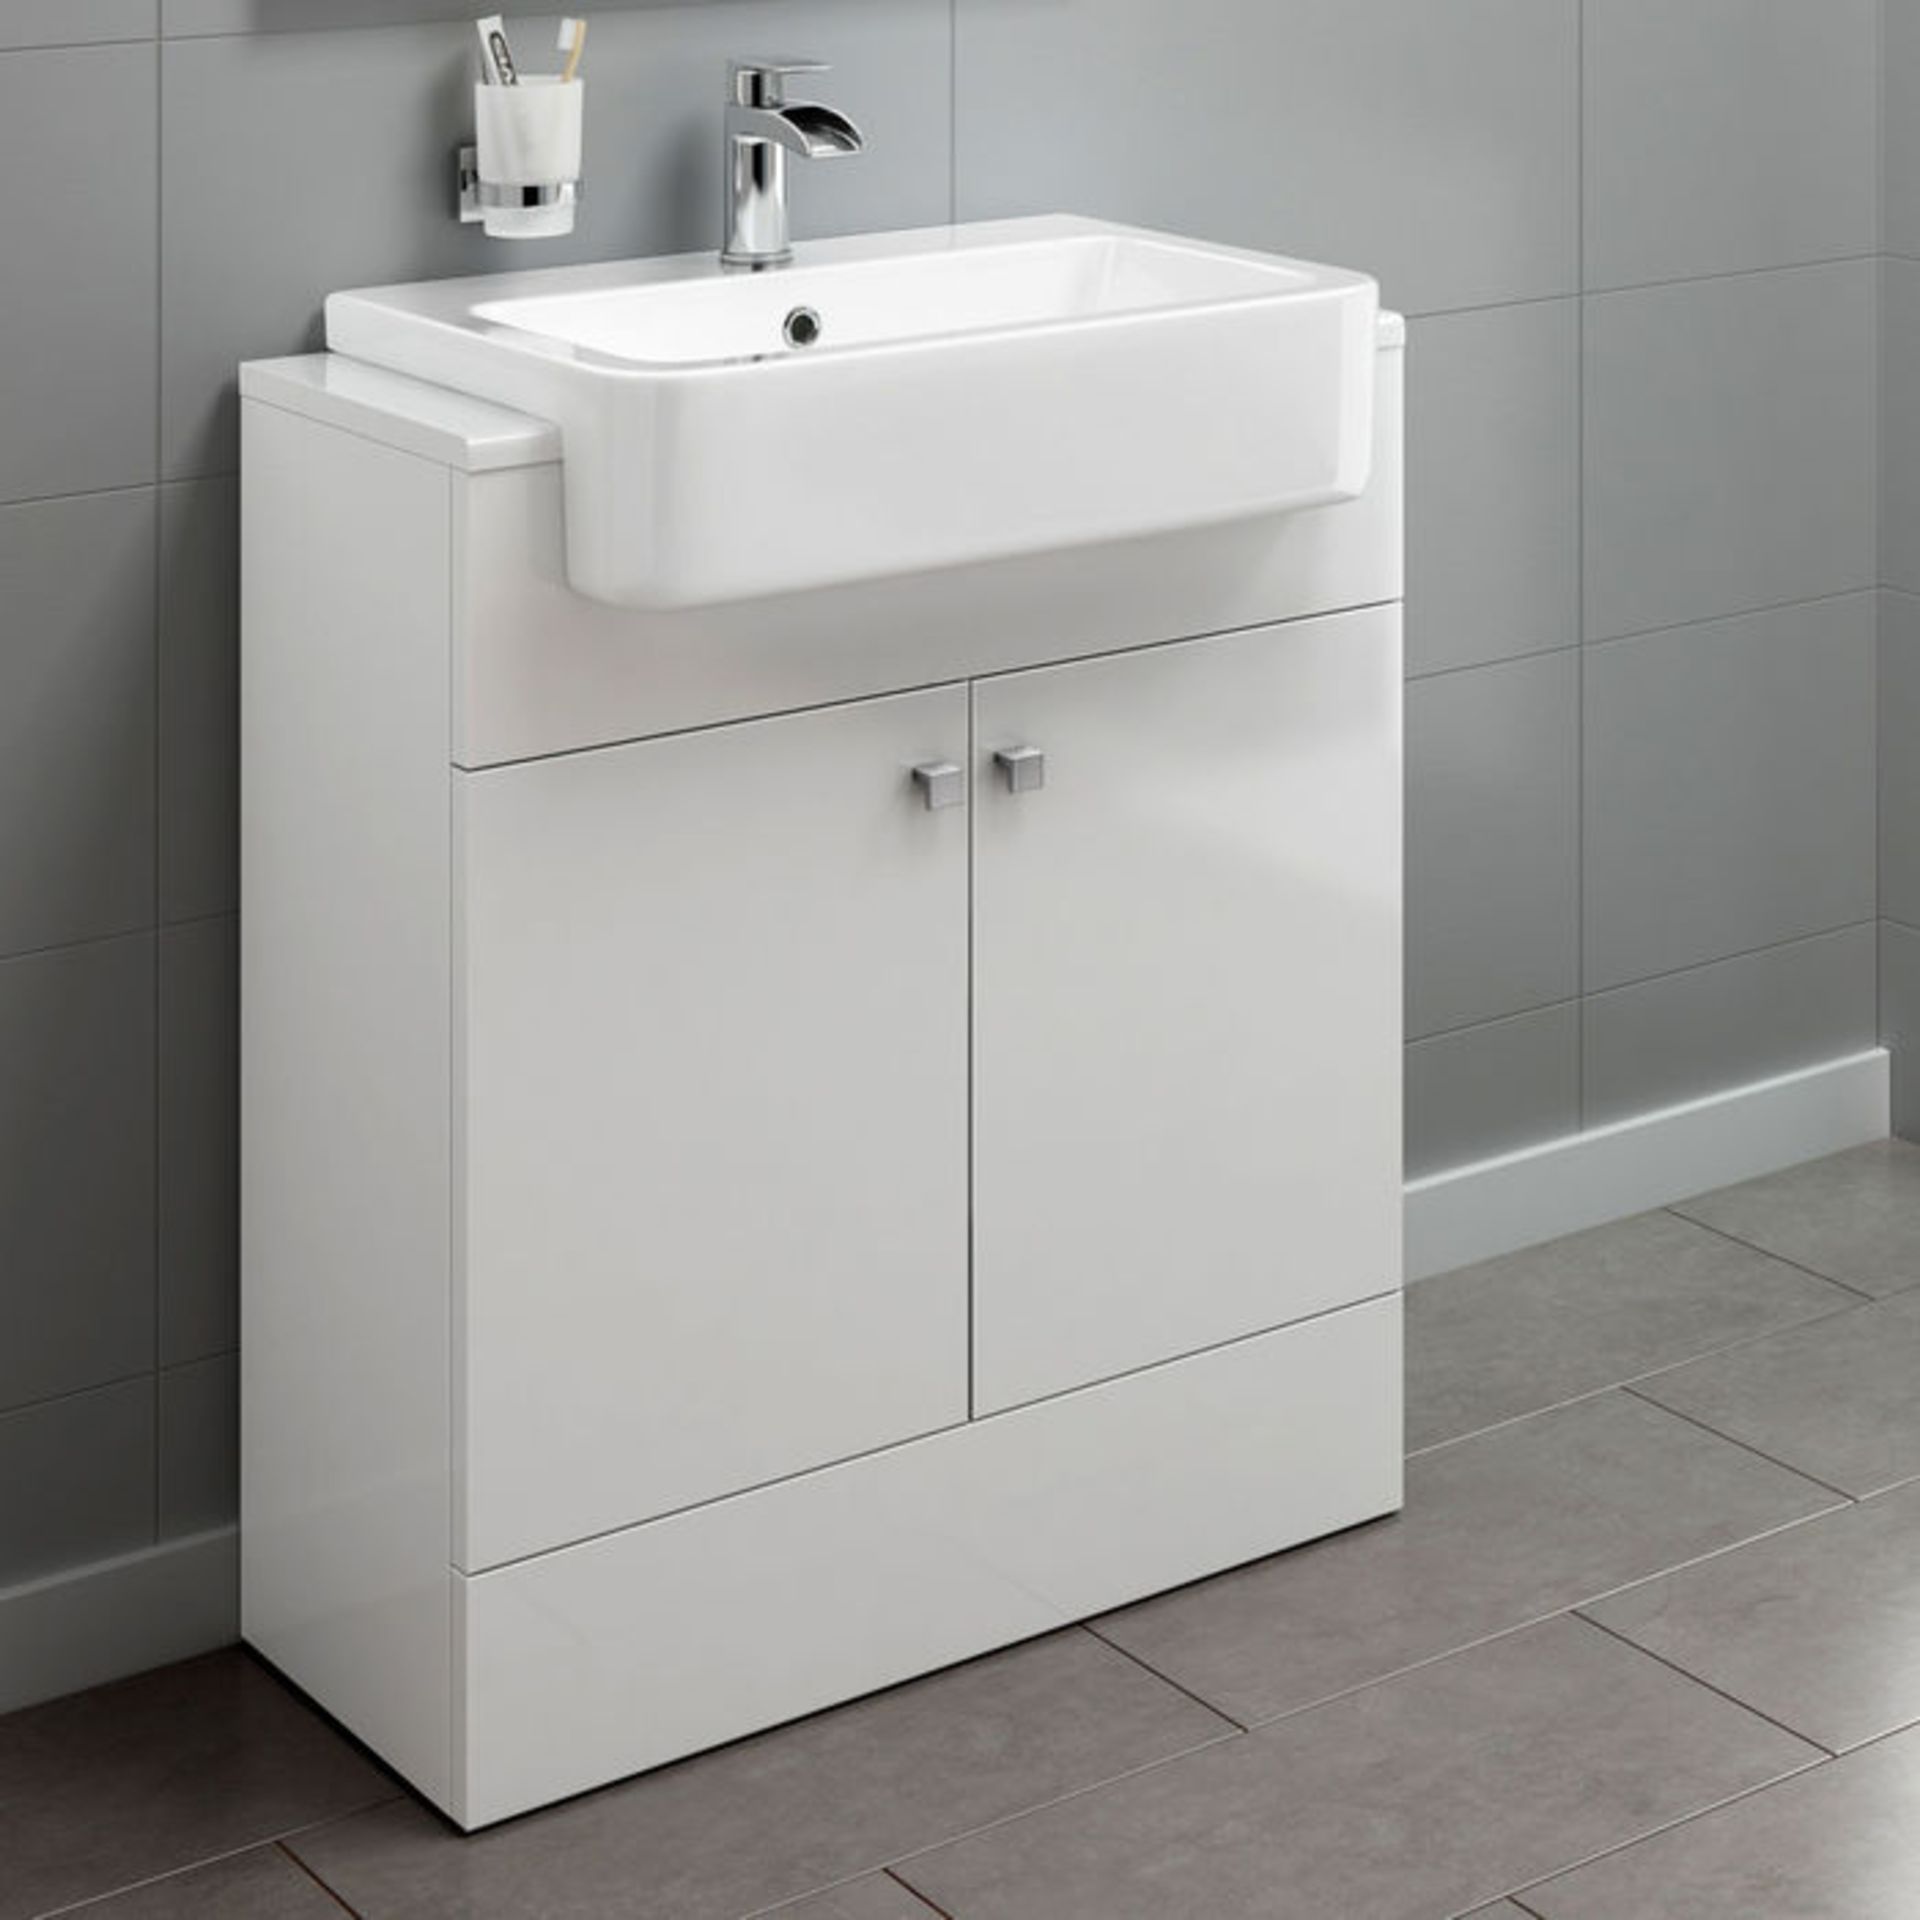 (H20) 660mm Harper Gloss White Basin Vanity Unit - Floor Standing RRP £449.99. COMES COMPLETE WITH